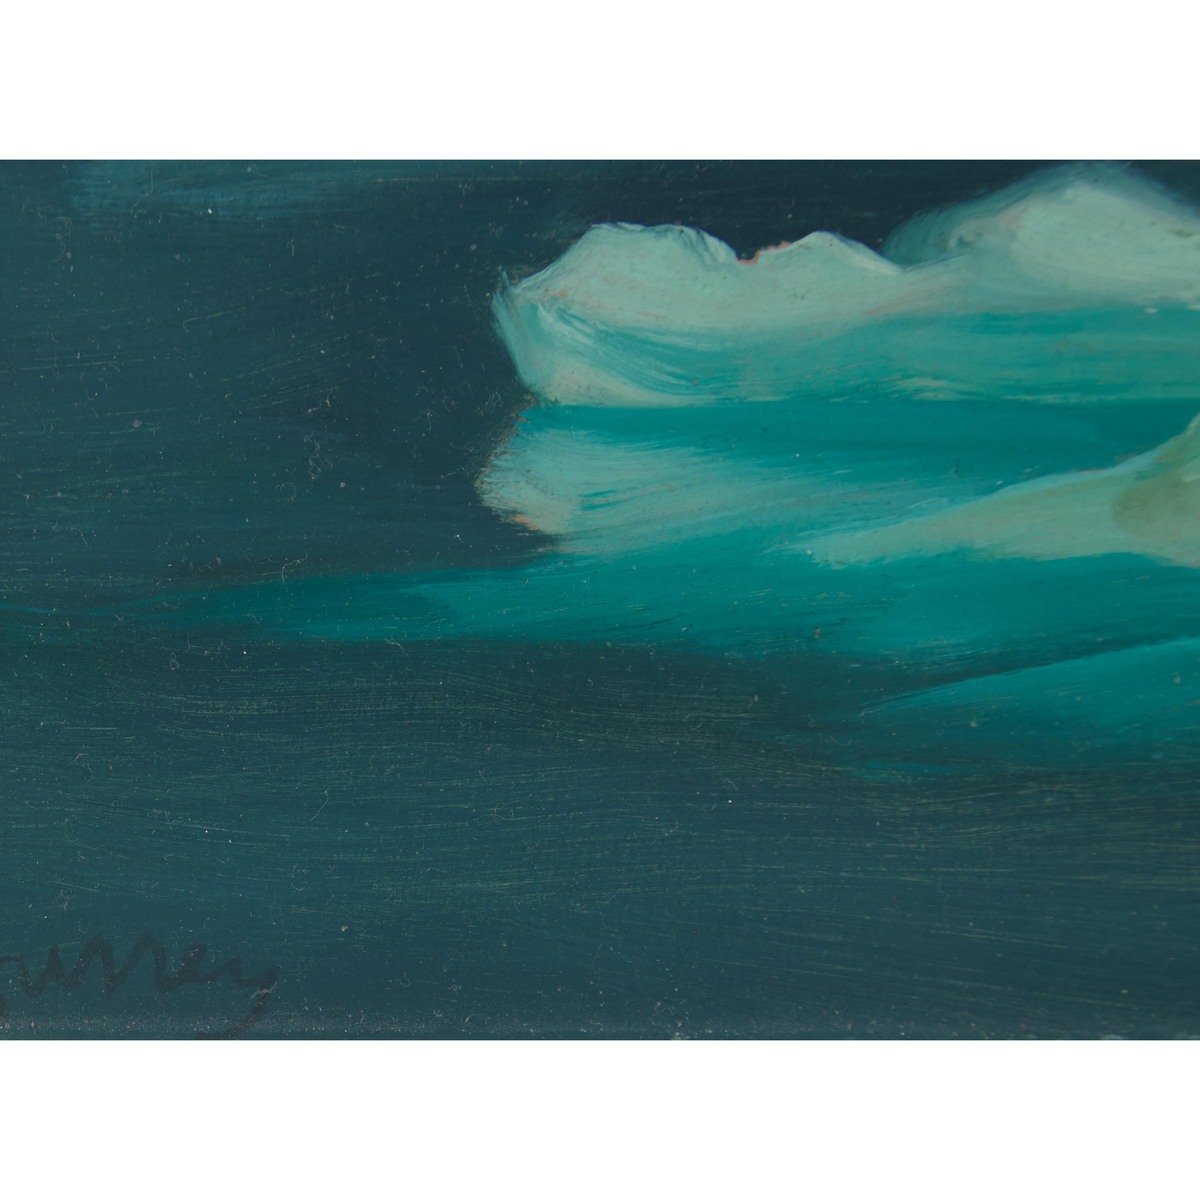 Philip Henry Howard Surrey, RCA (1910-1990), DEVON ISLAND WITH FLOES, 1958, 5.875 x 7.875 in — 14.9 - Image 3 of 4